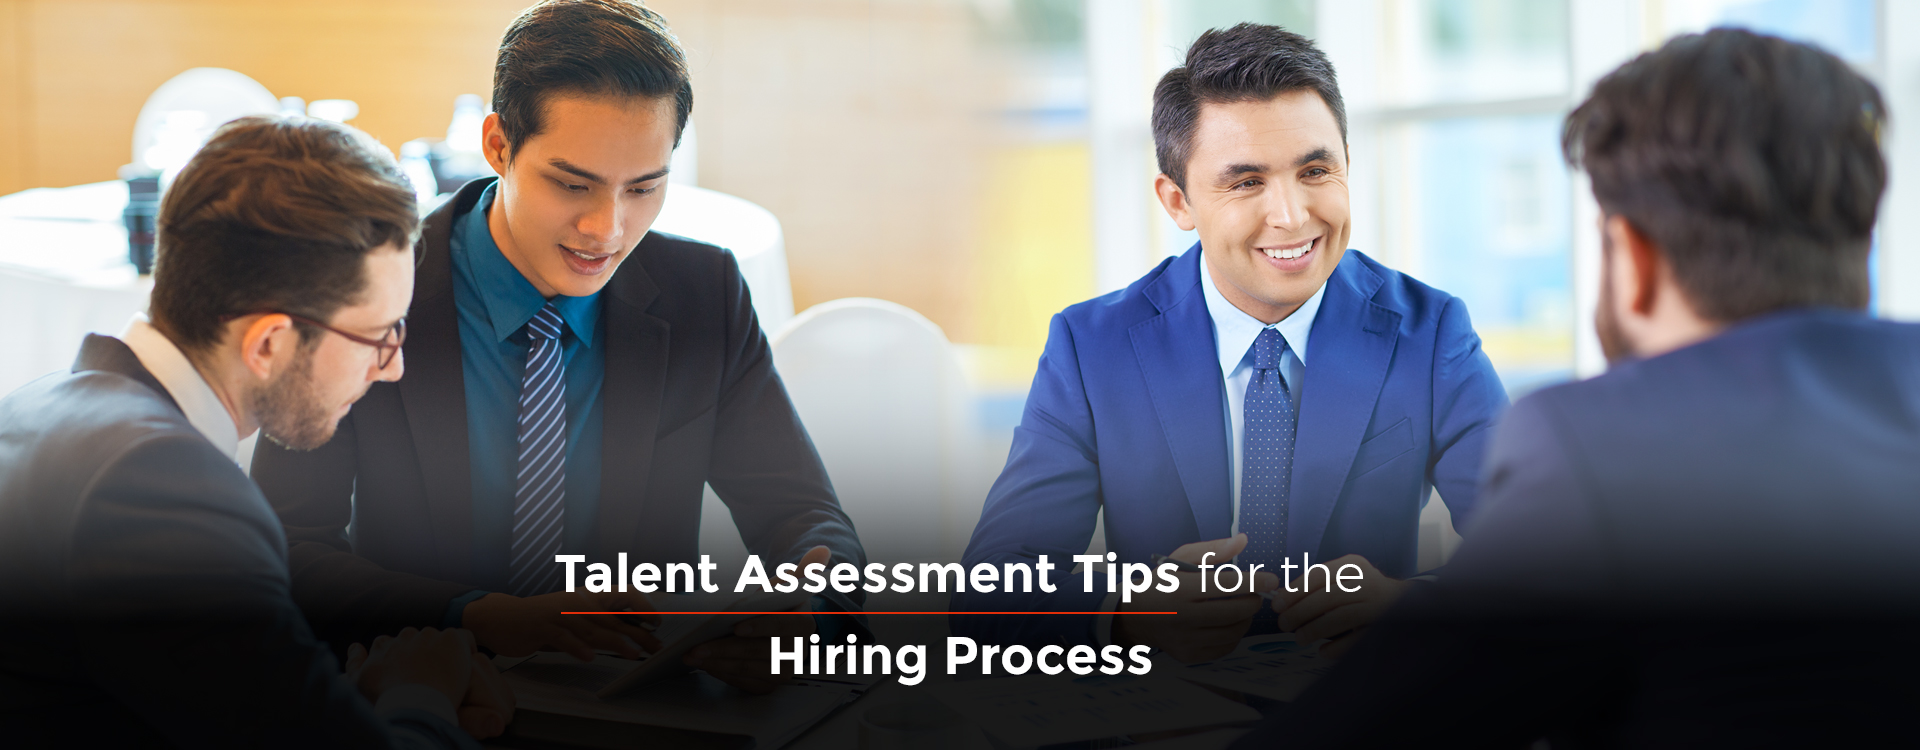 Talent Assessment Tips for the Hiring Process